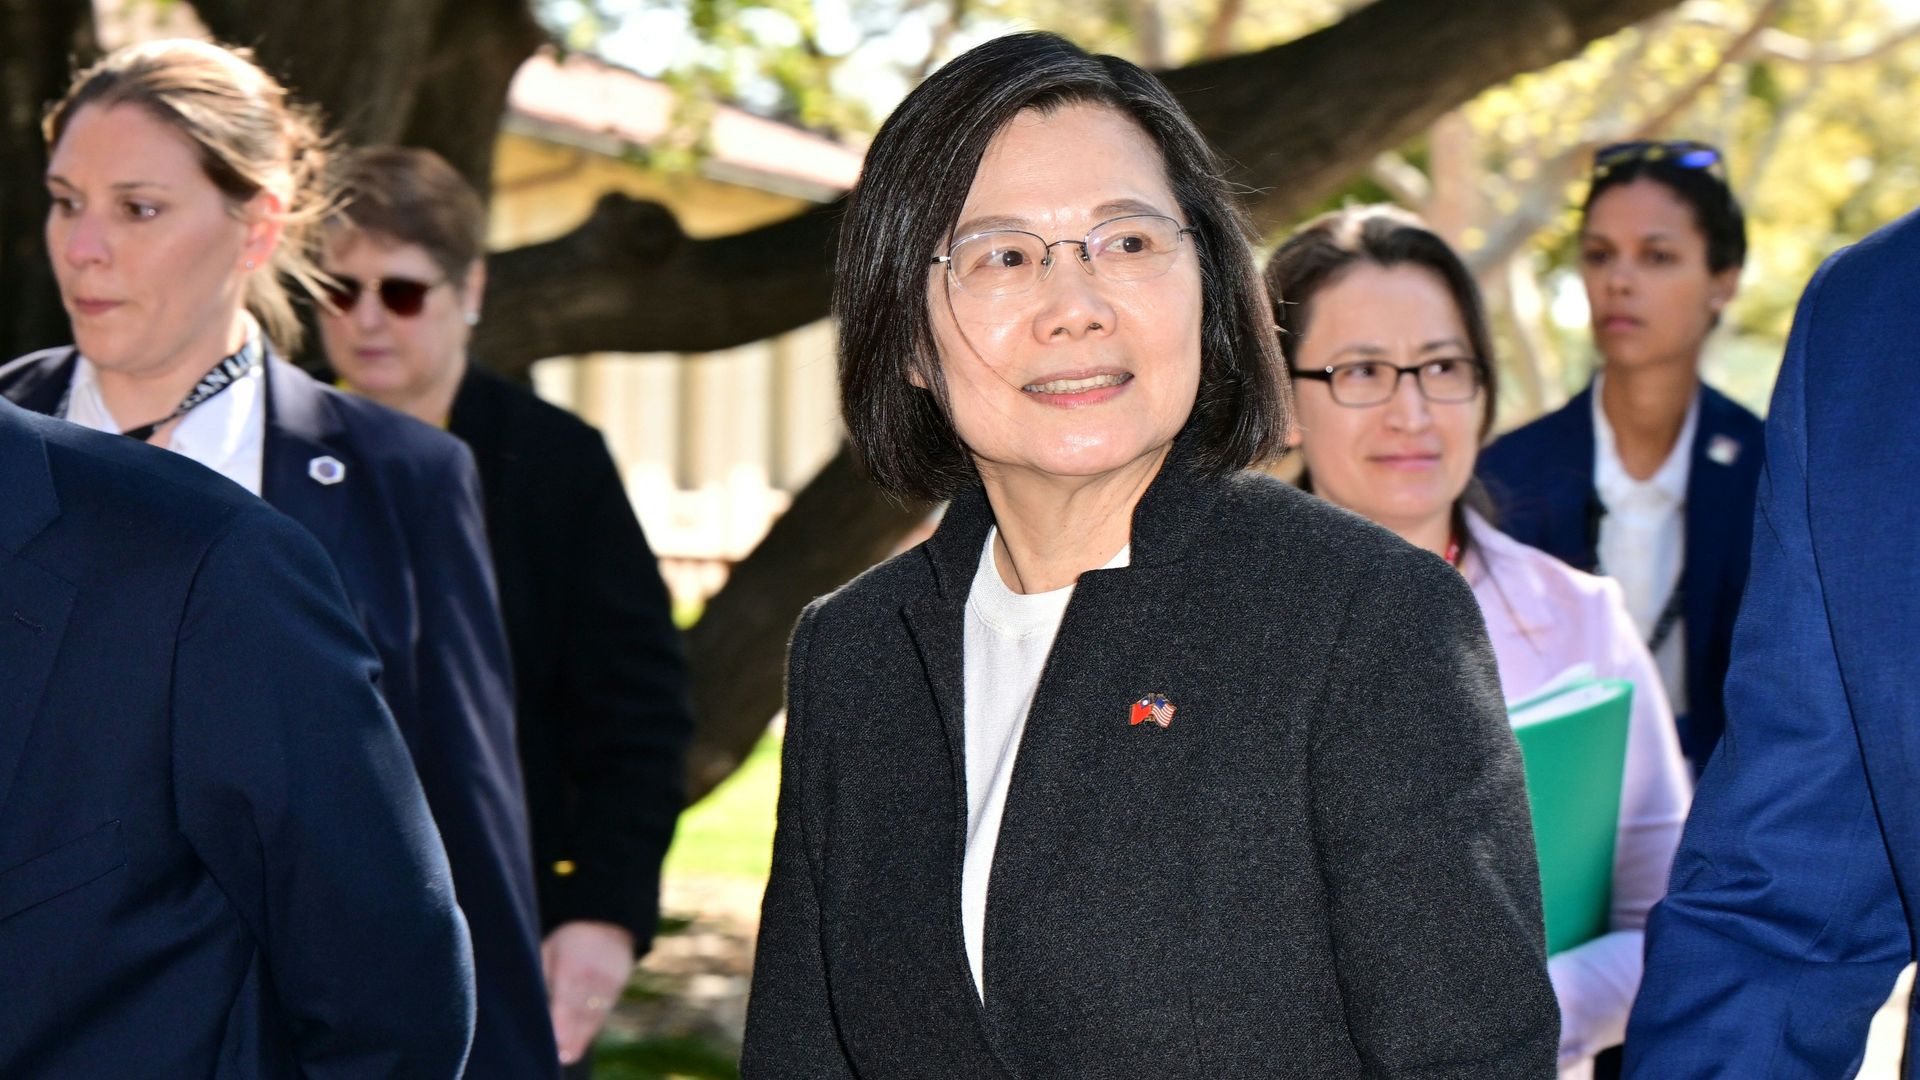 Taiwanese President Tsai Ing-wen at the Ronald Reagan Presidential Library in Simi Valley, California, on April 5.